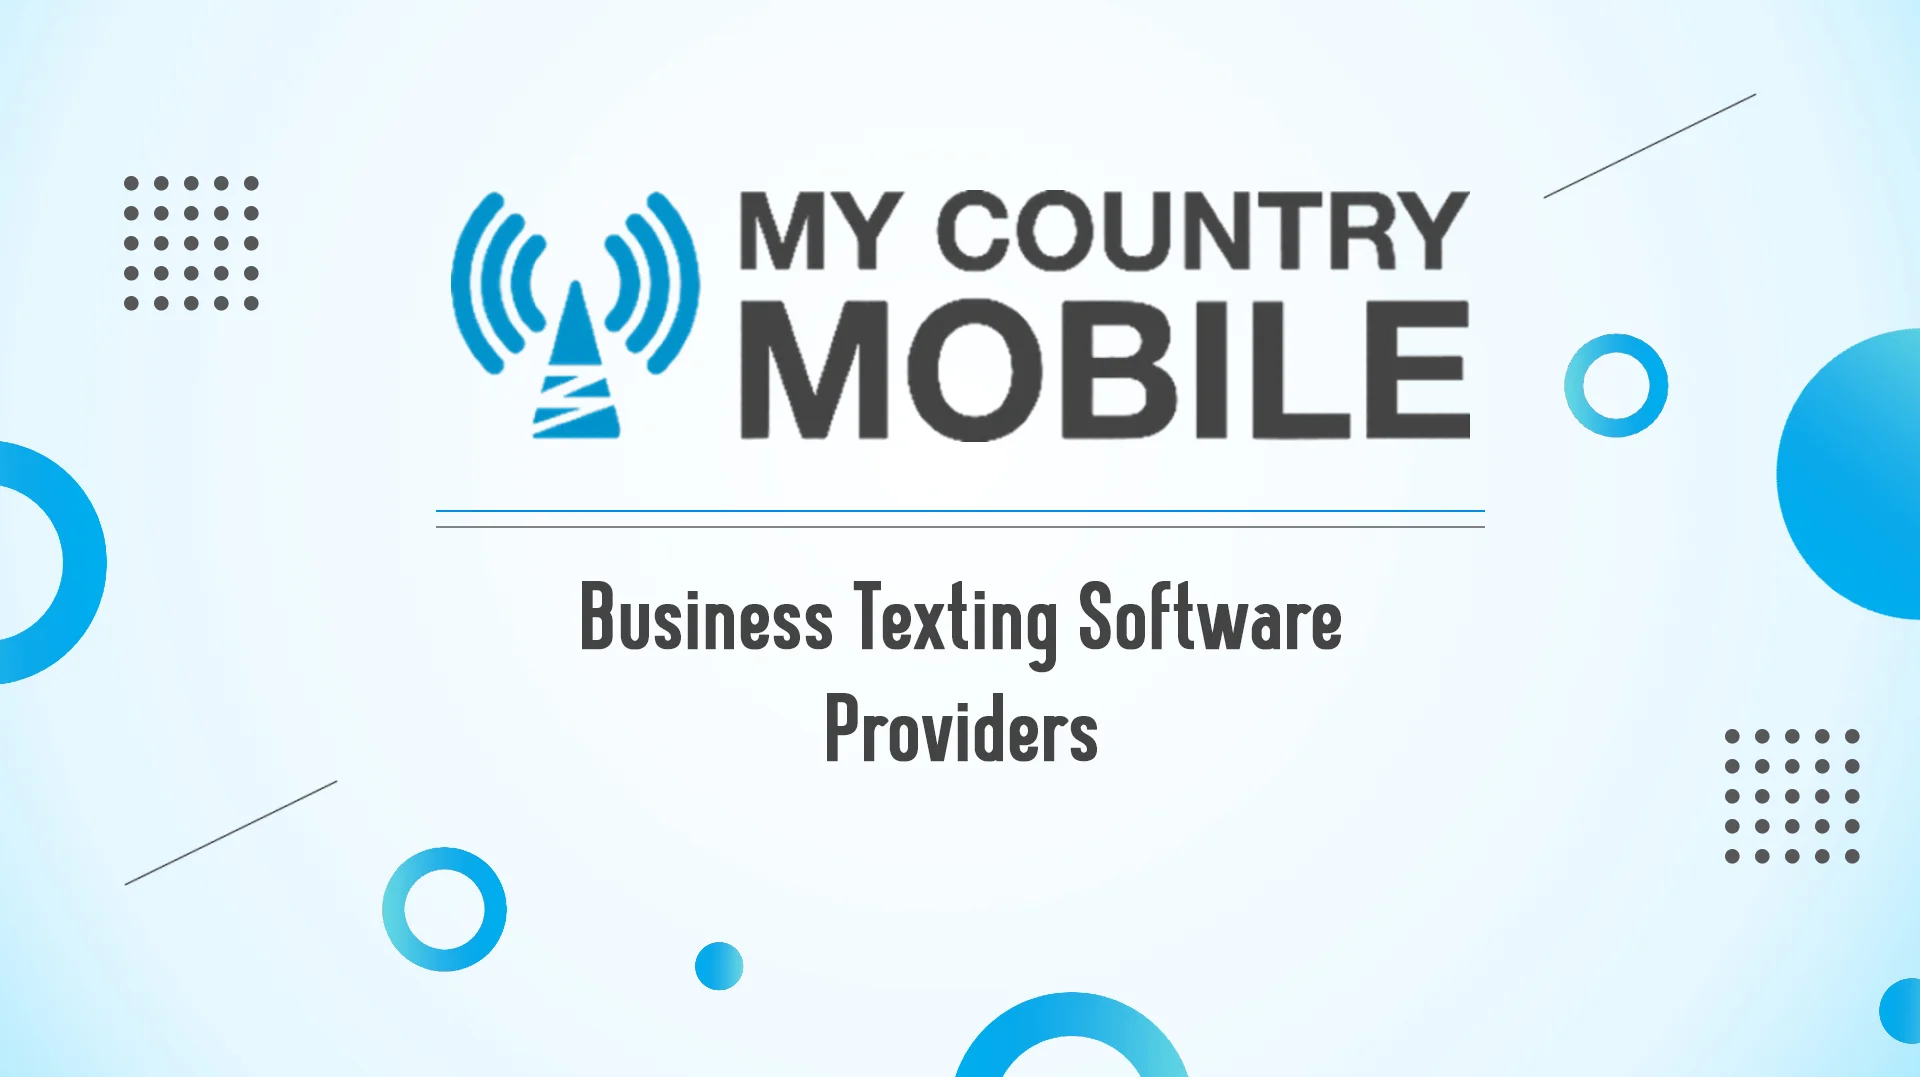 Business Texting Software